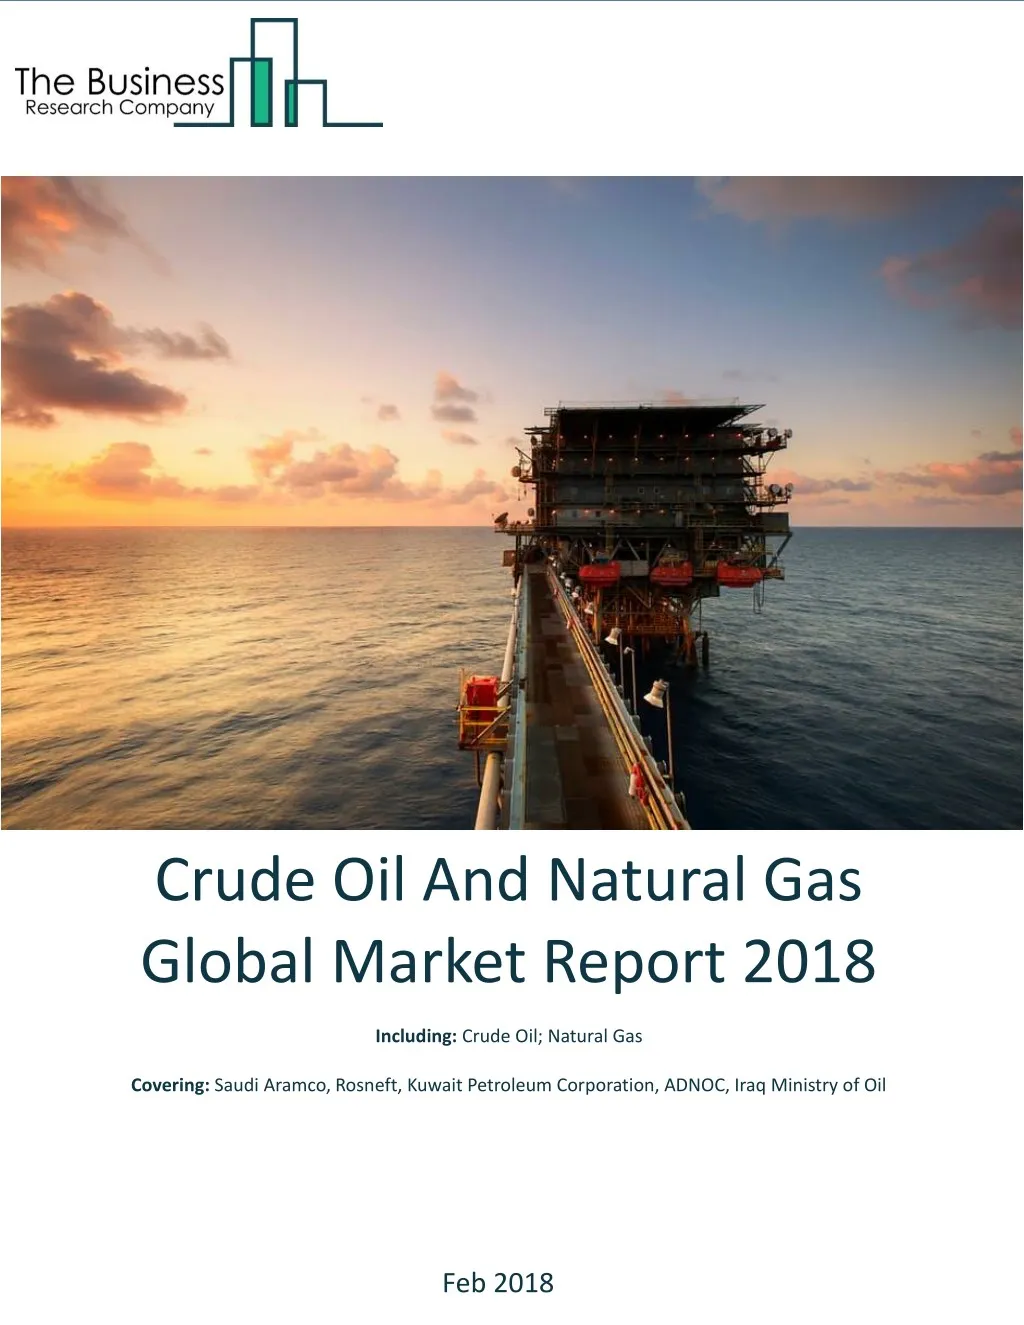 crude oil and natural gas global market report